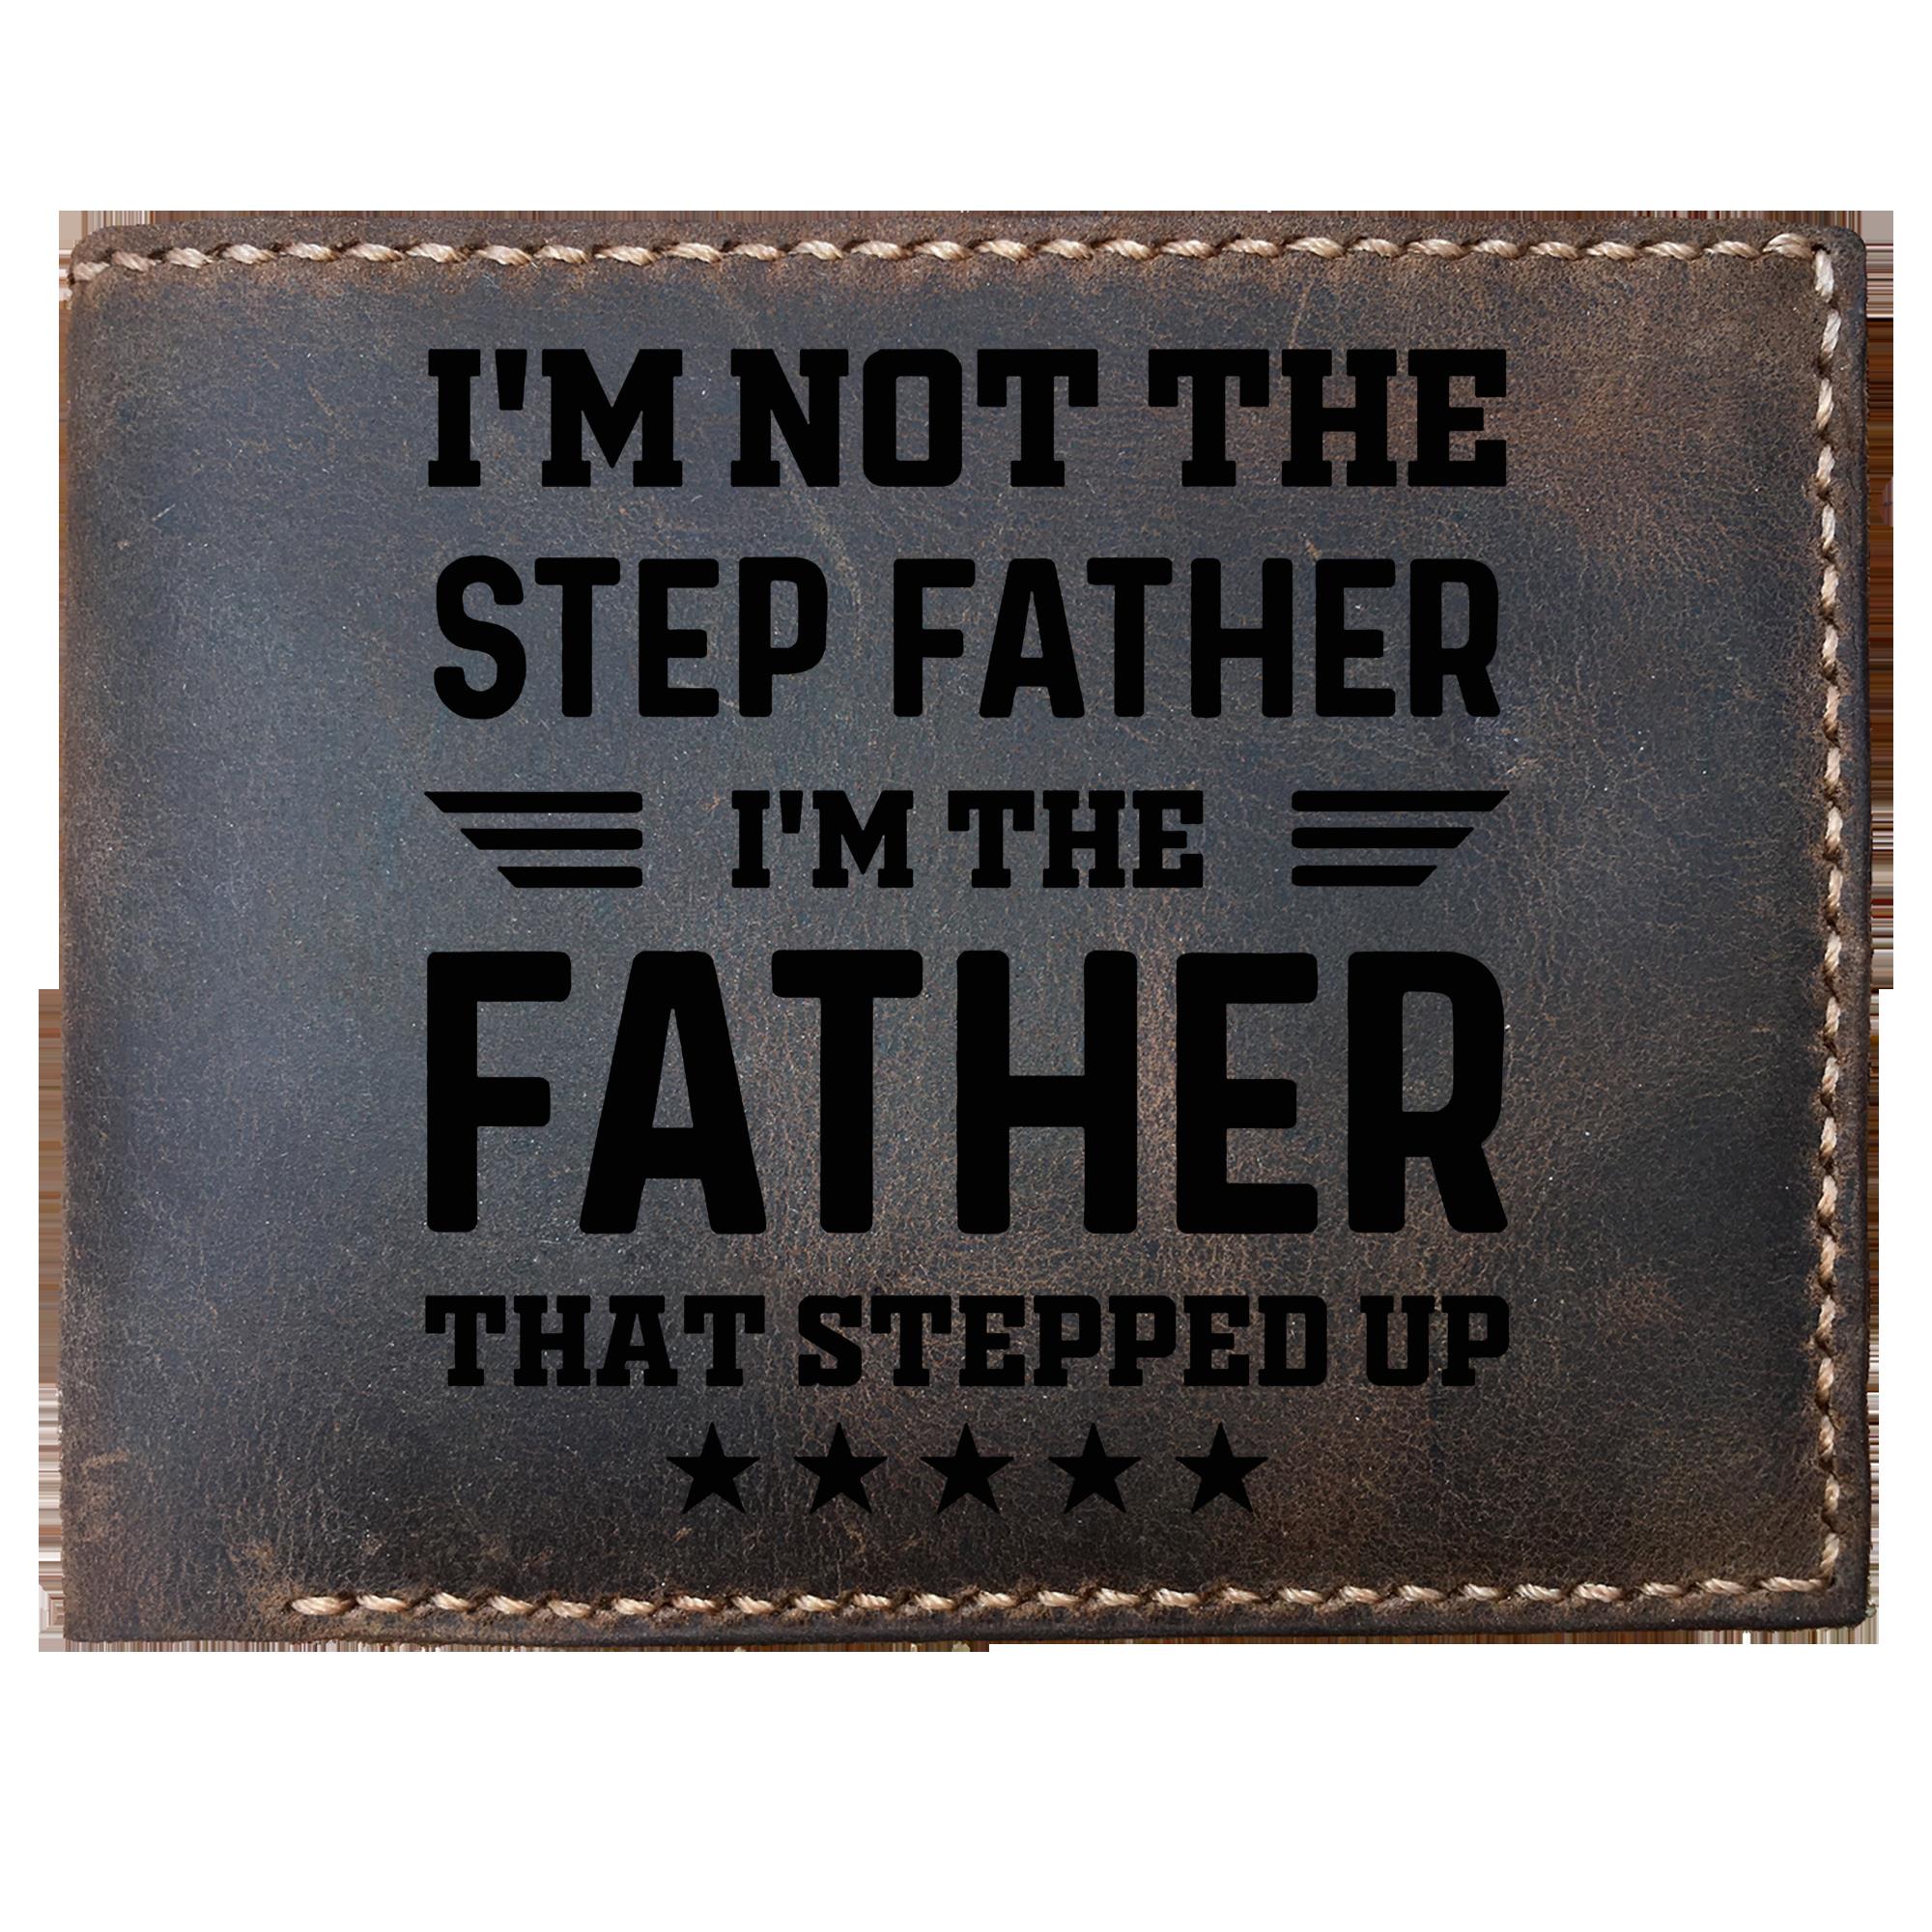 Skitongifts Funny Custom Laser Engraved Bifold Leather Wallet For Men, I'm Not The Step Father I'm The Father That Stepped Up Presents